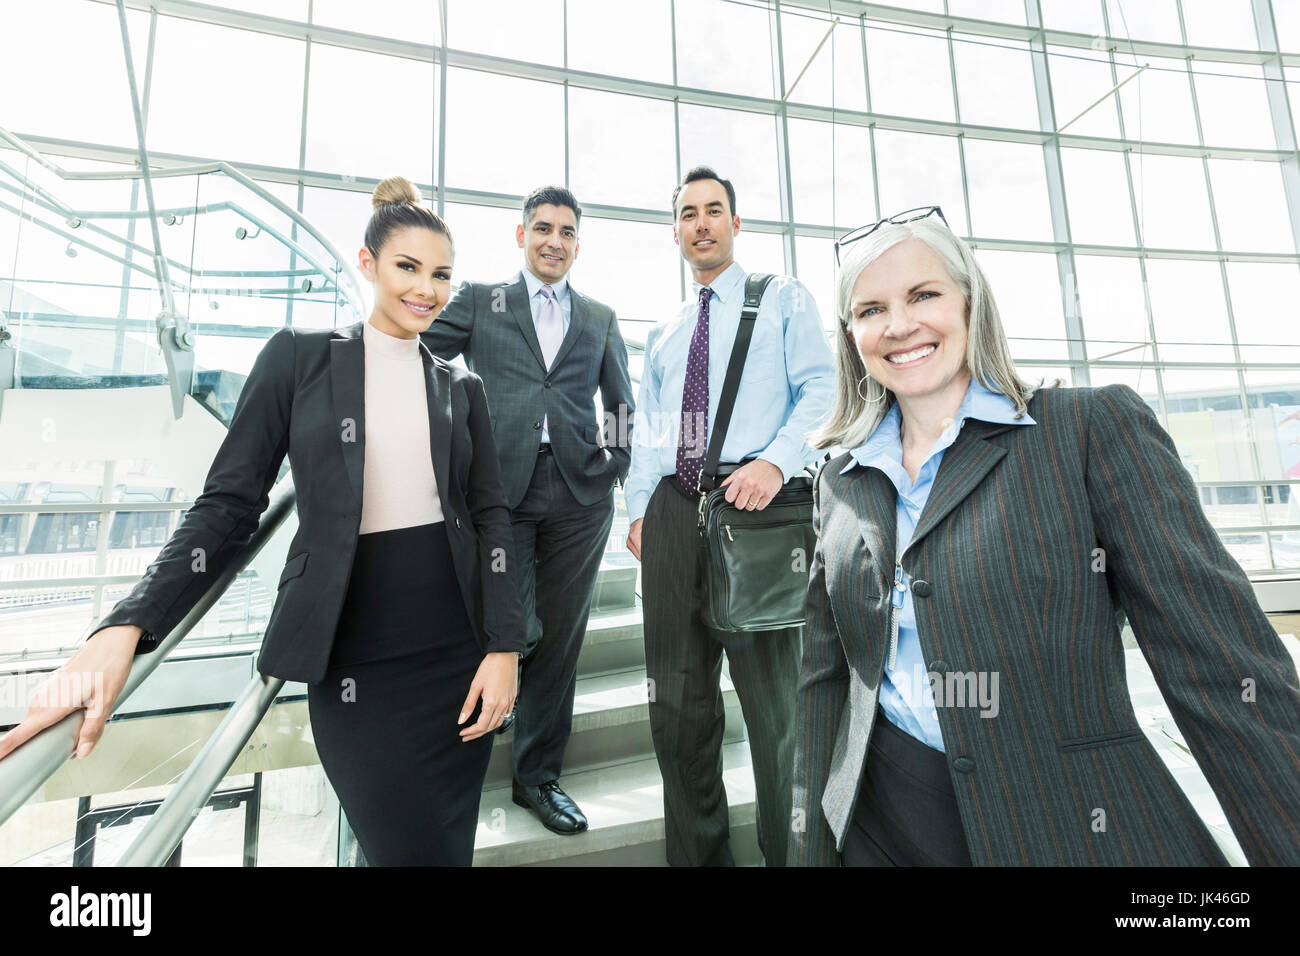 Portrait of smiling business people standing on staircase Stock Photo